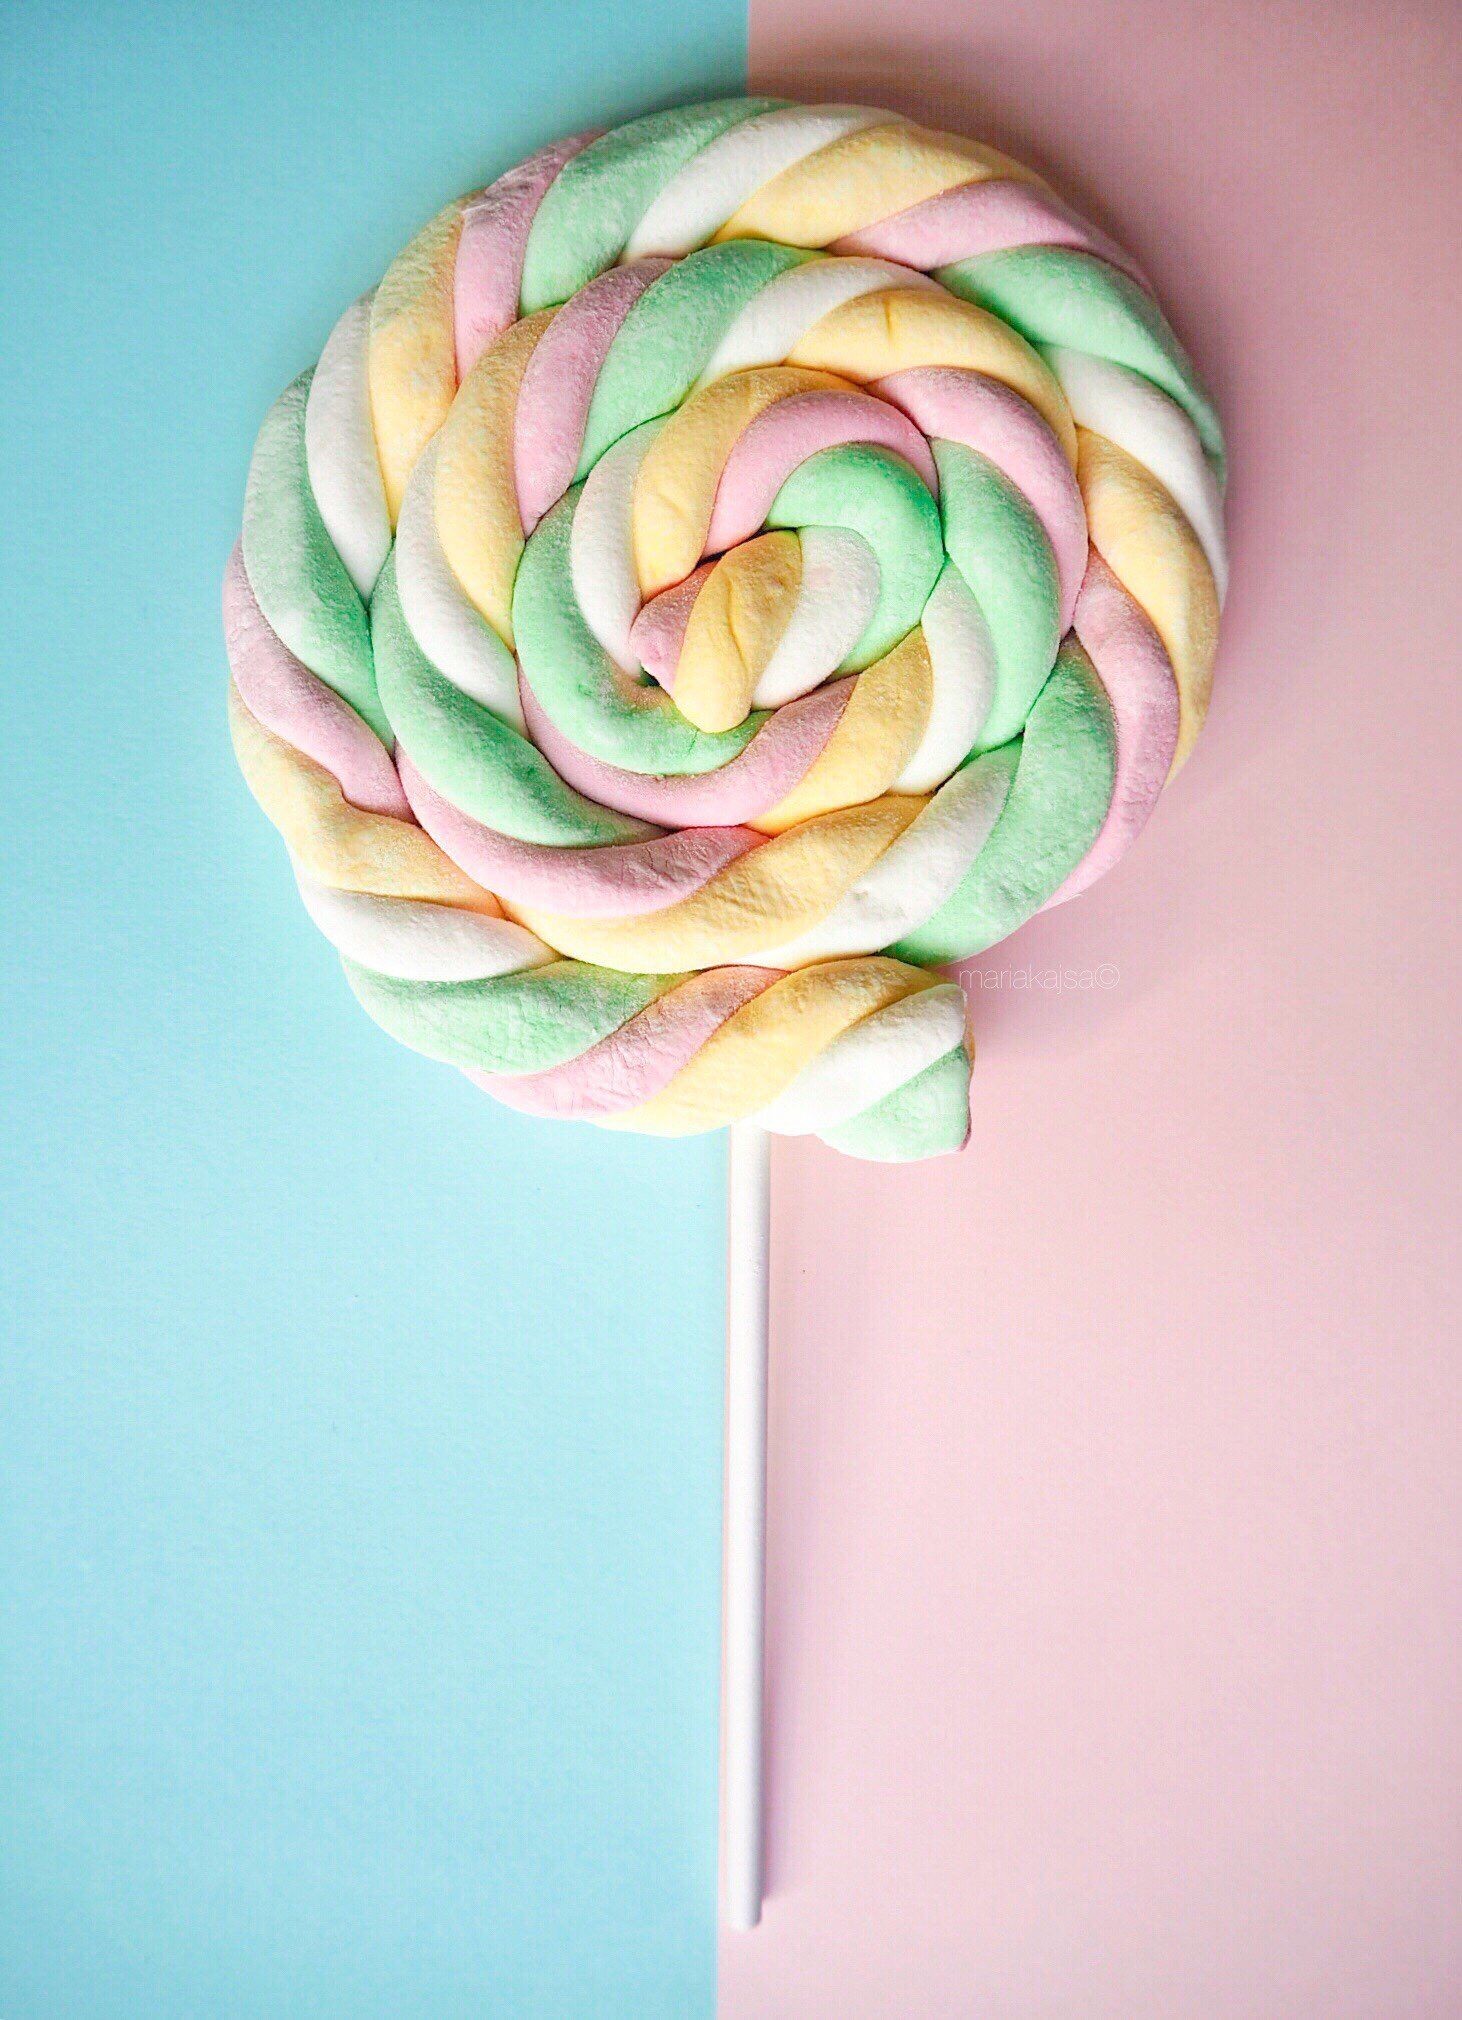 Iphone And Android Wallpapers - Lollipop Wallpaper Iphone - 1462x2020  Wallpaper 